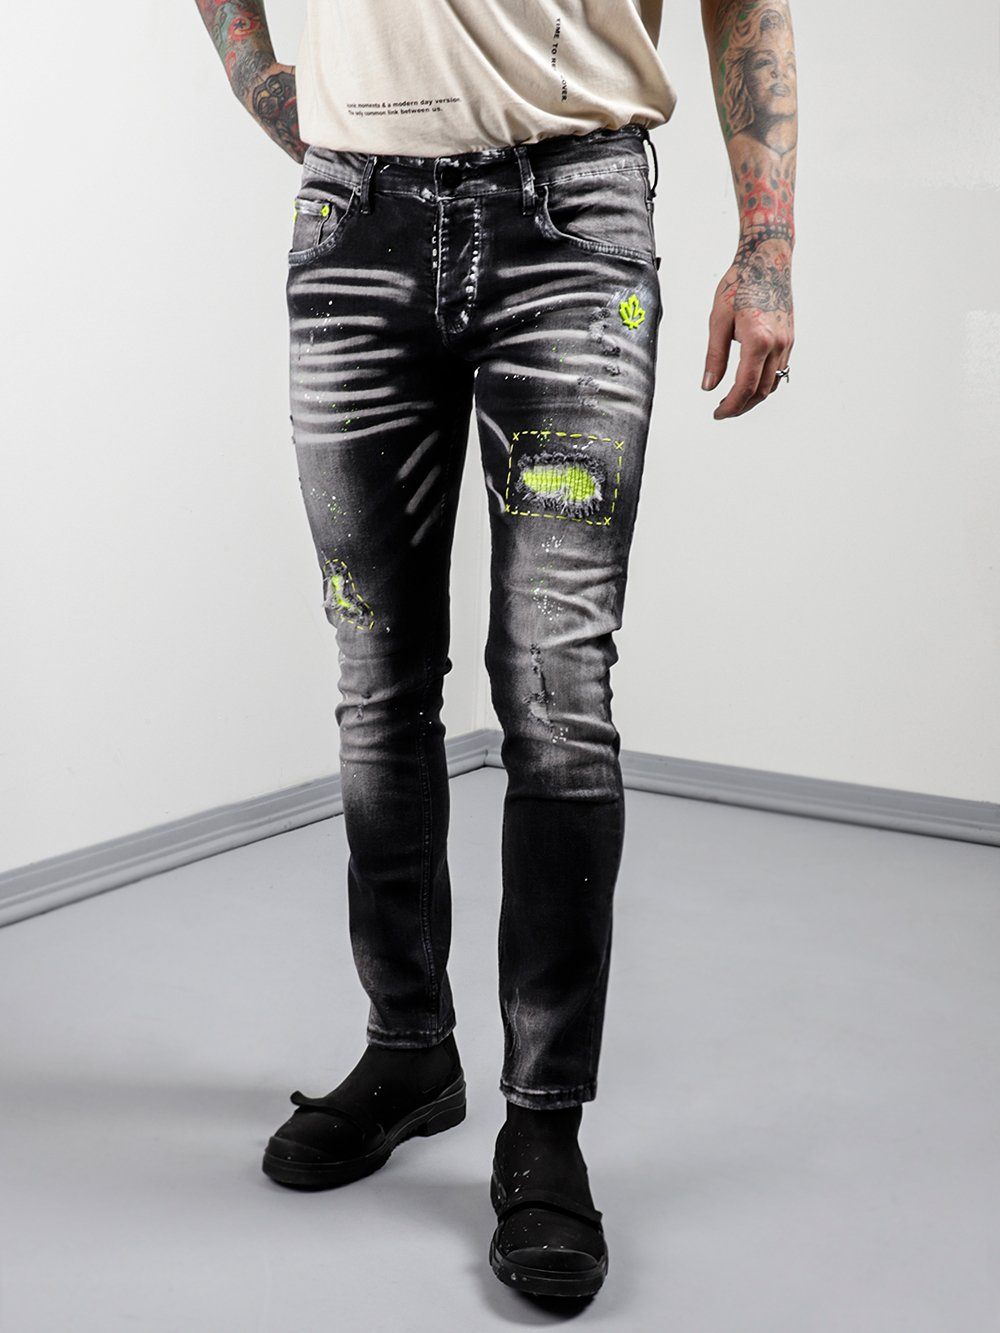 A man in NEON TALK jeans with tattoos standing in front of a white wall.